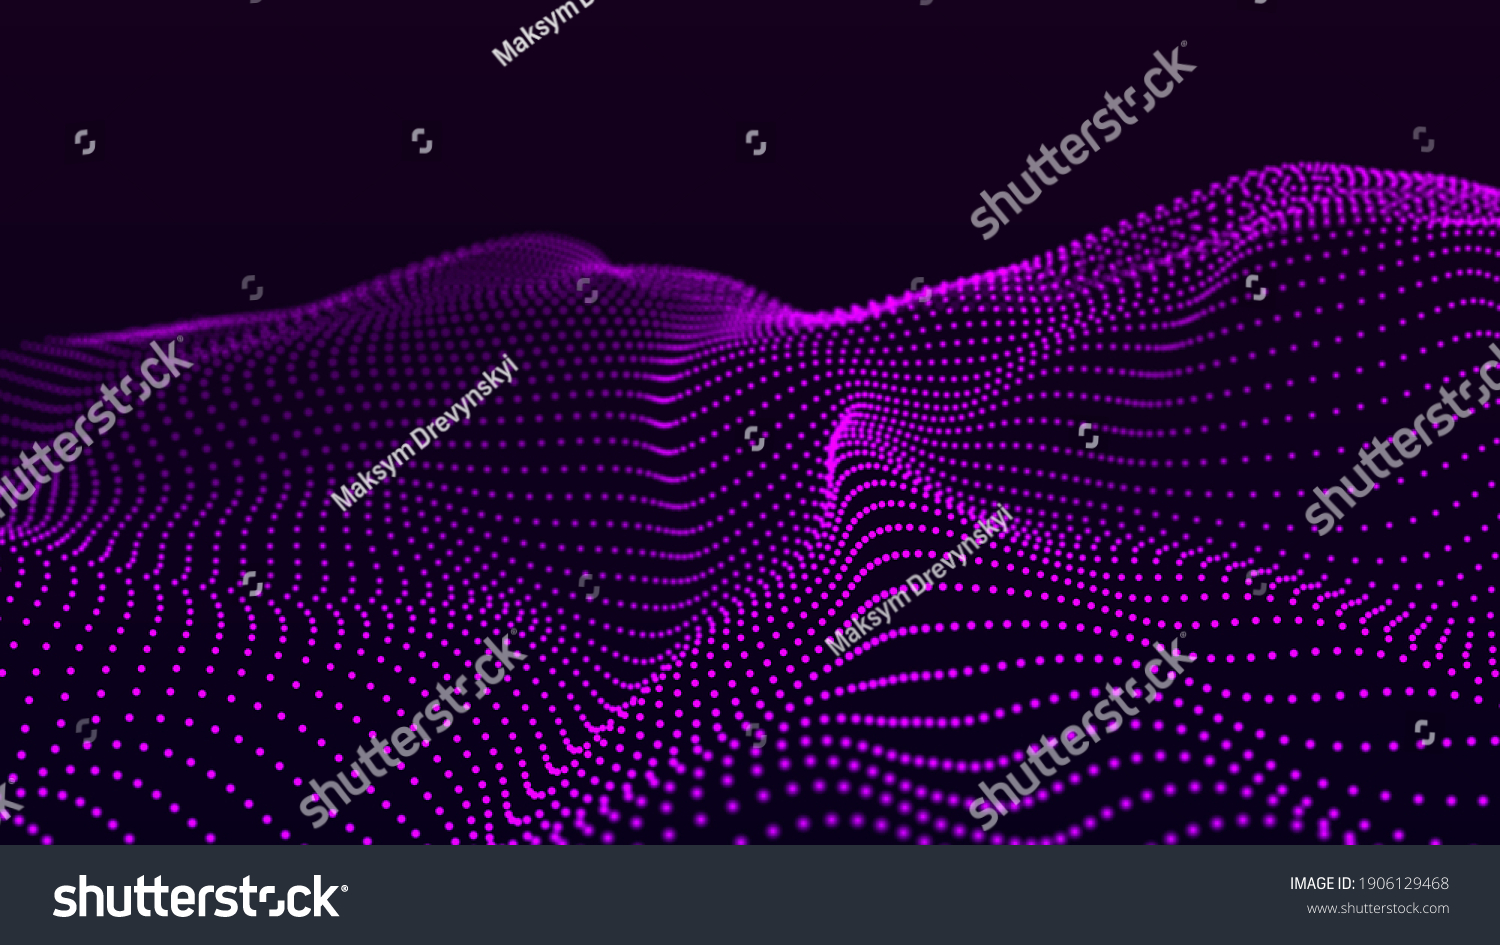 Background big data visualization futuristic technology. Abstract Music background. Beautiful motion waving dots texture with glowing defocused particles.The glow of a fractal element in a futuristic #1906129468